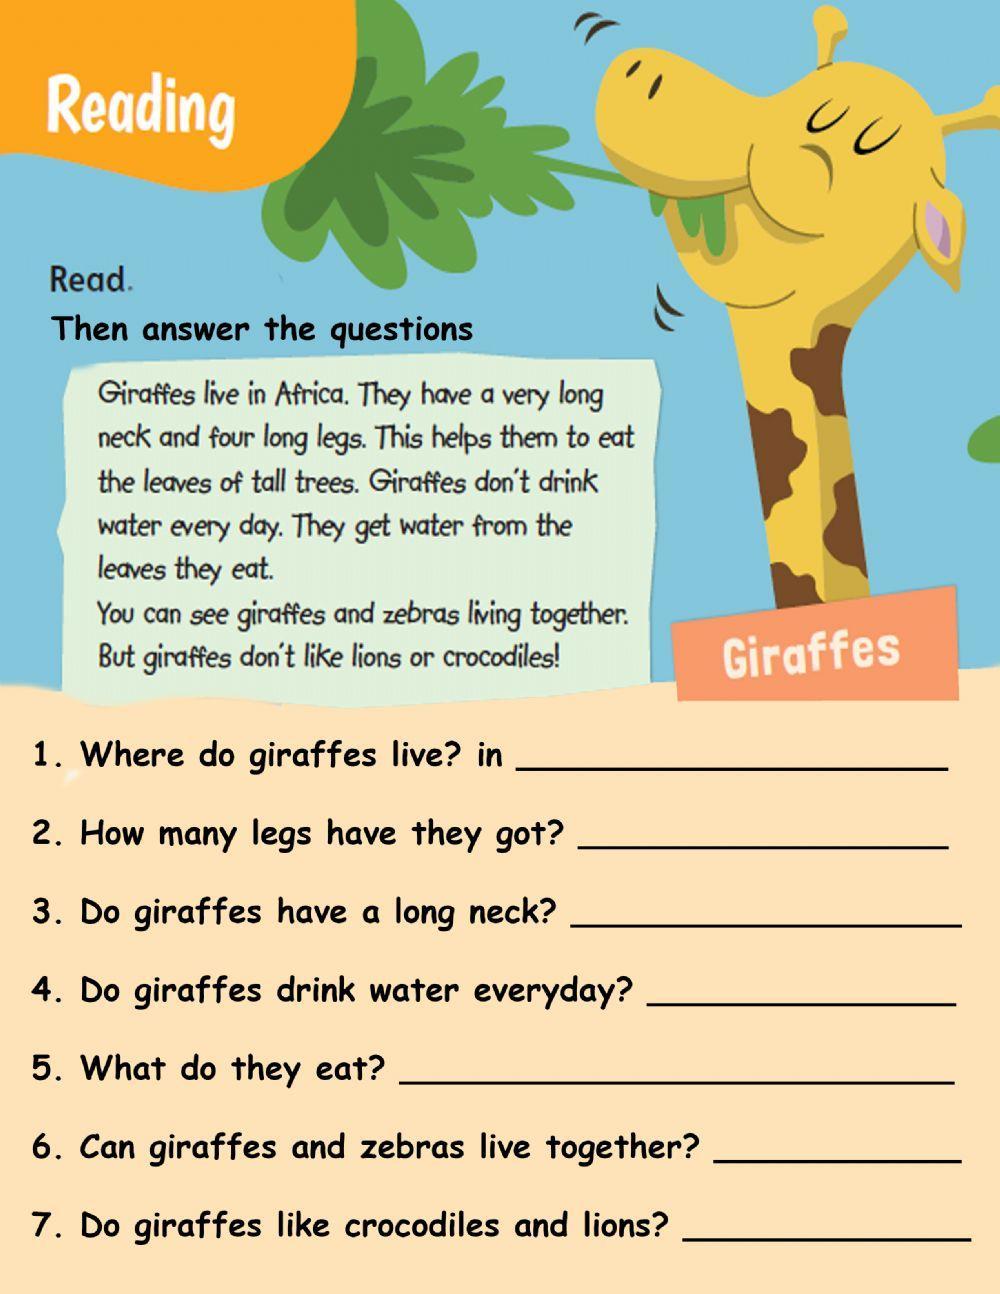 Reading about giraffes